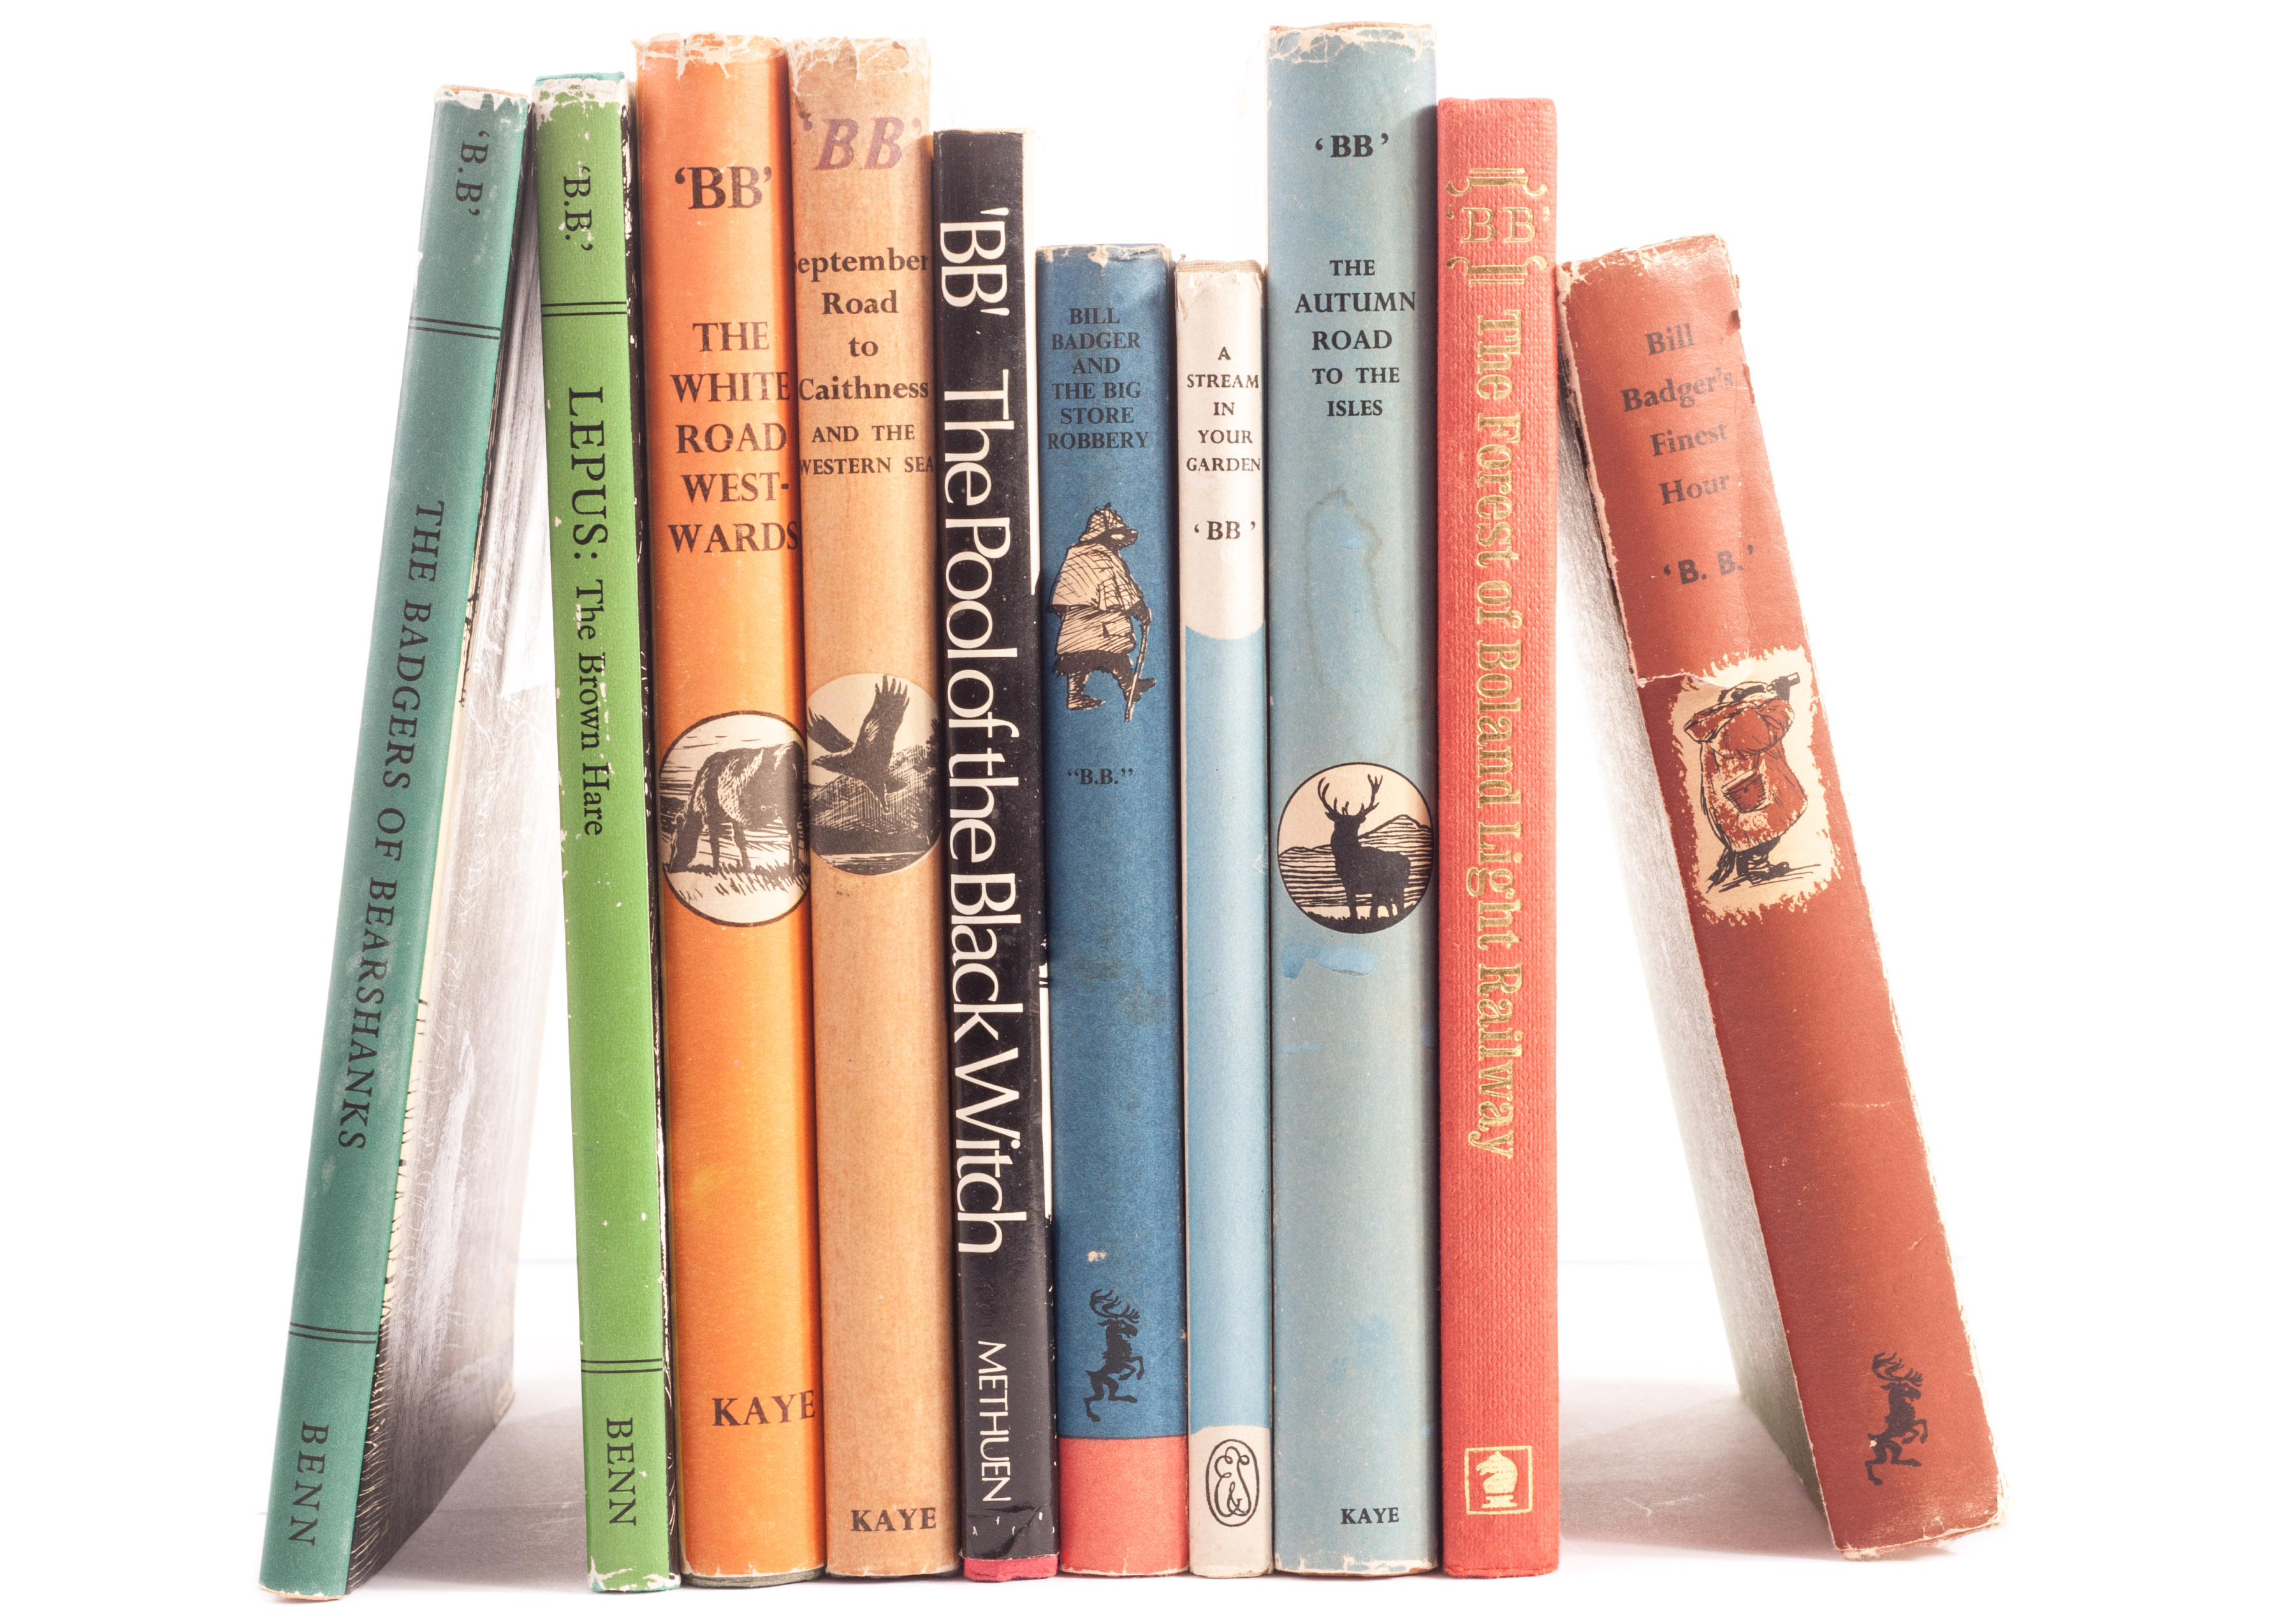 Watkins-Pitchford, Denys (BB), A collection of seven 1st edition hardback volumes complete with dust